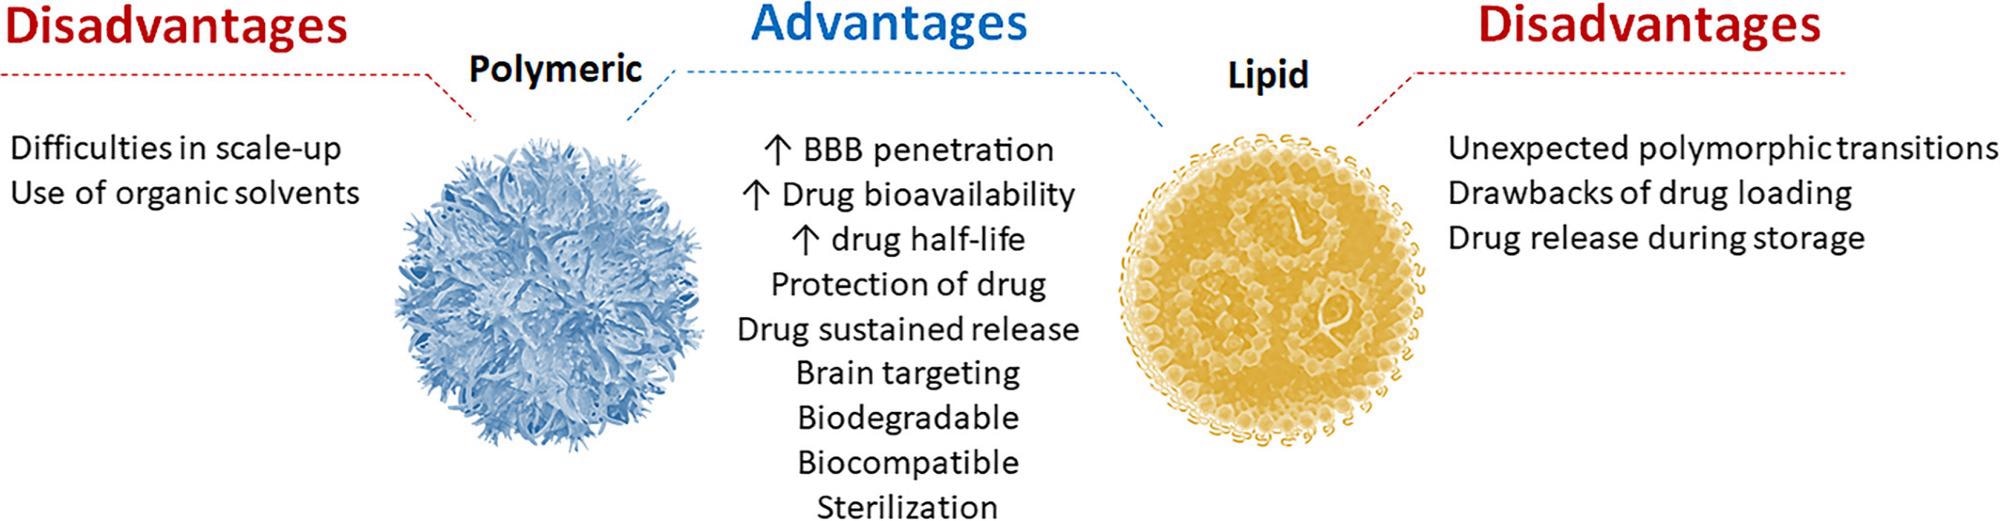 Main advantages and disadvantages of polymer and lipid nanoparticles.